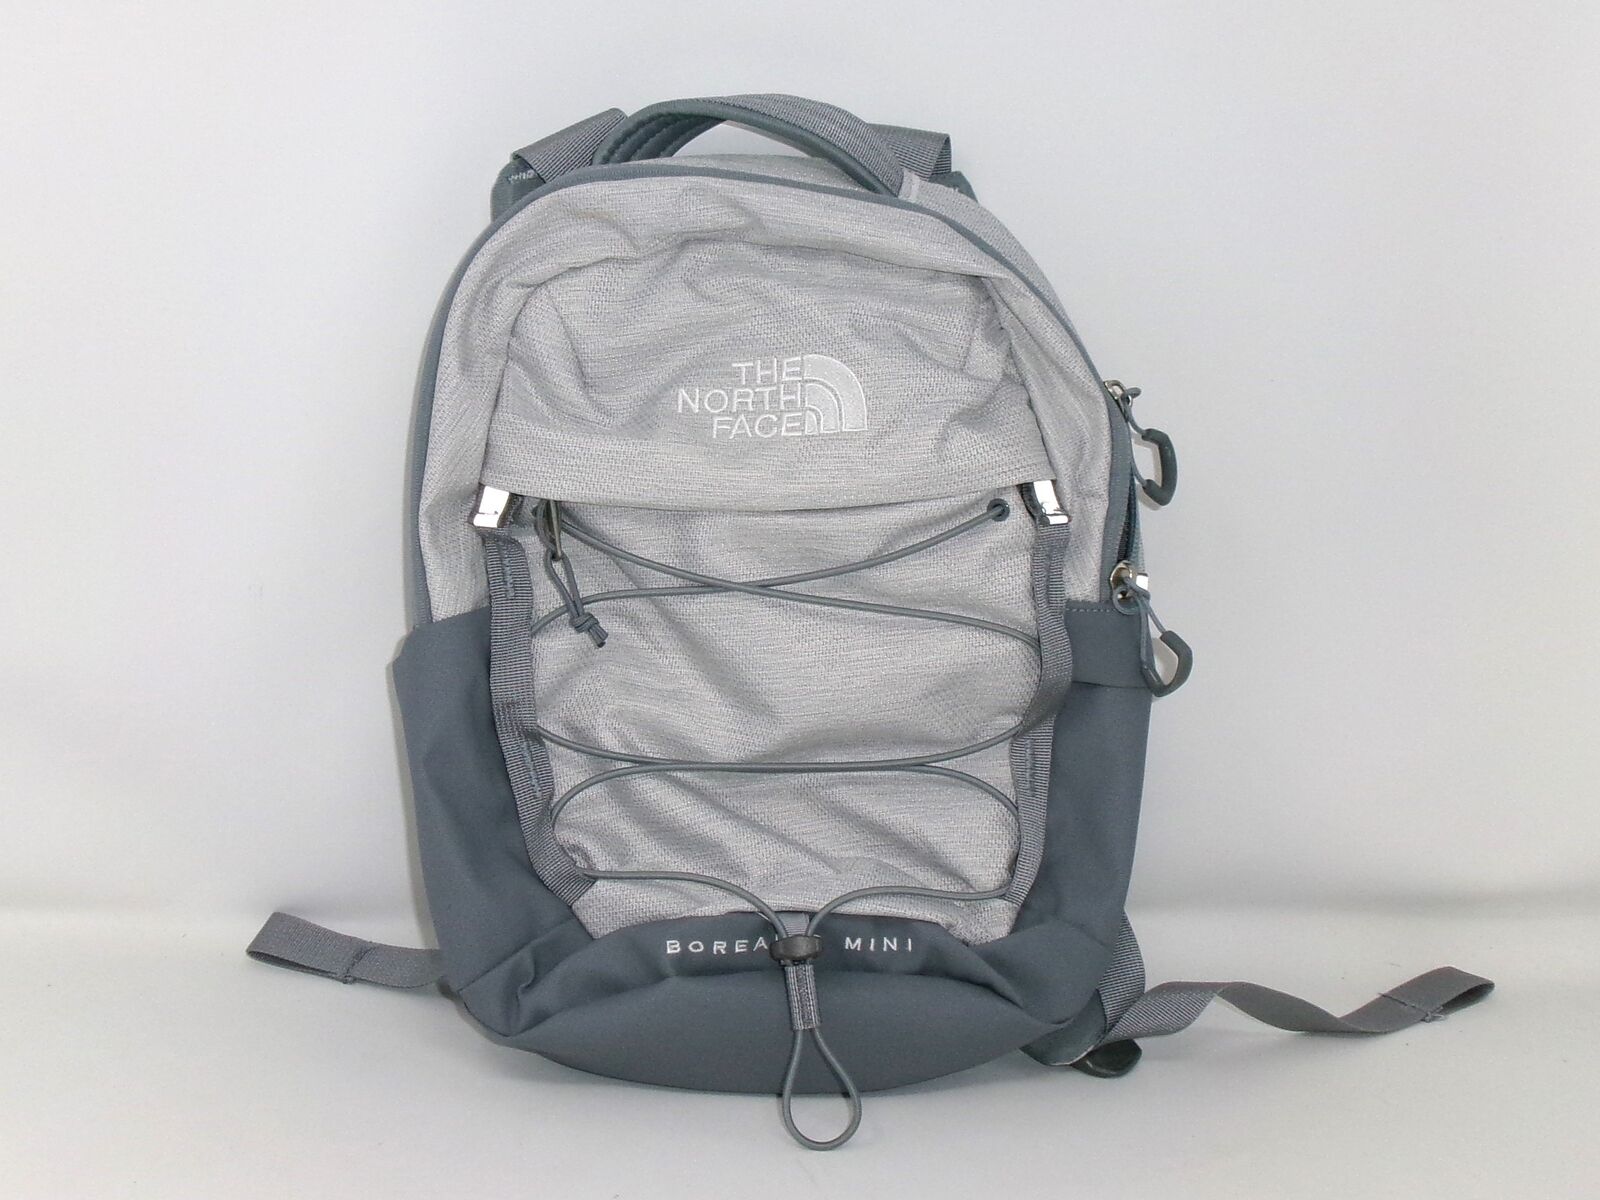 The North Face Mini Backpack, TNF White Metallic Melange/Mid Grey - Gently Used